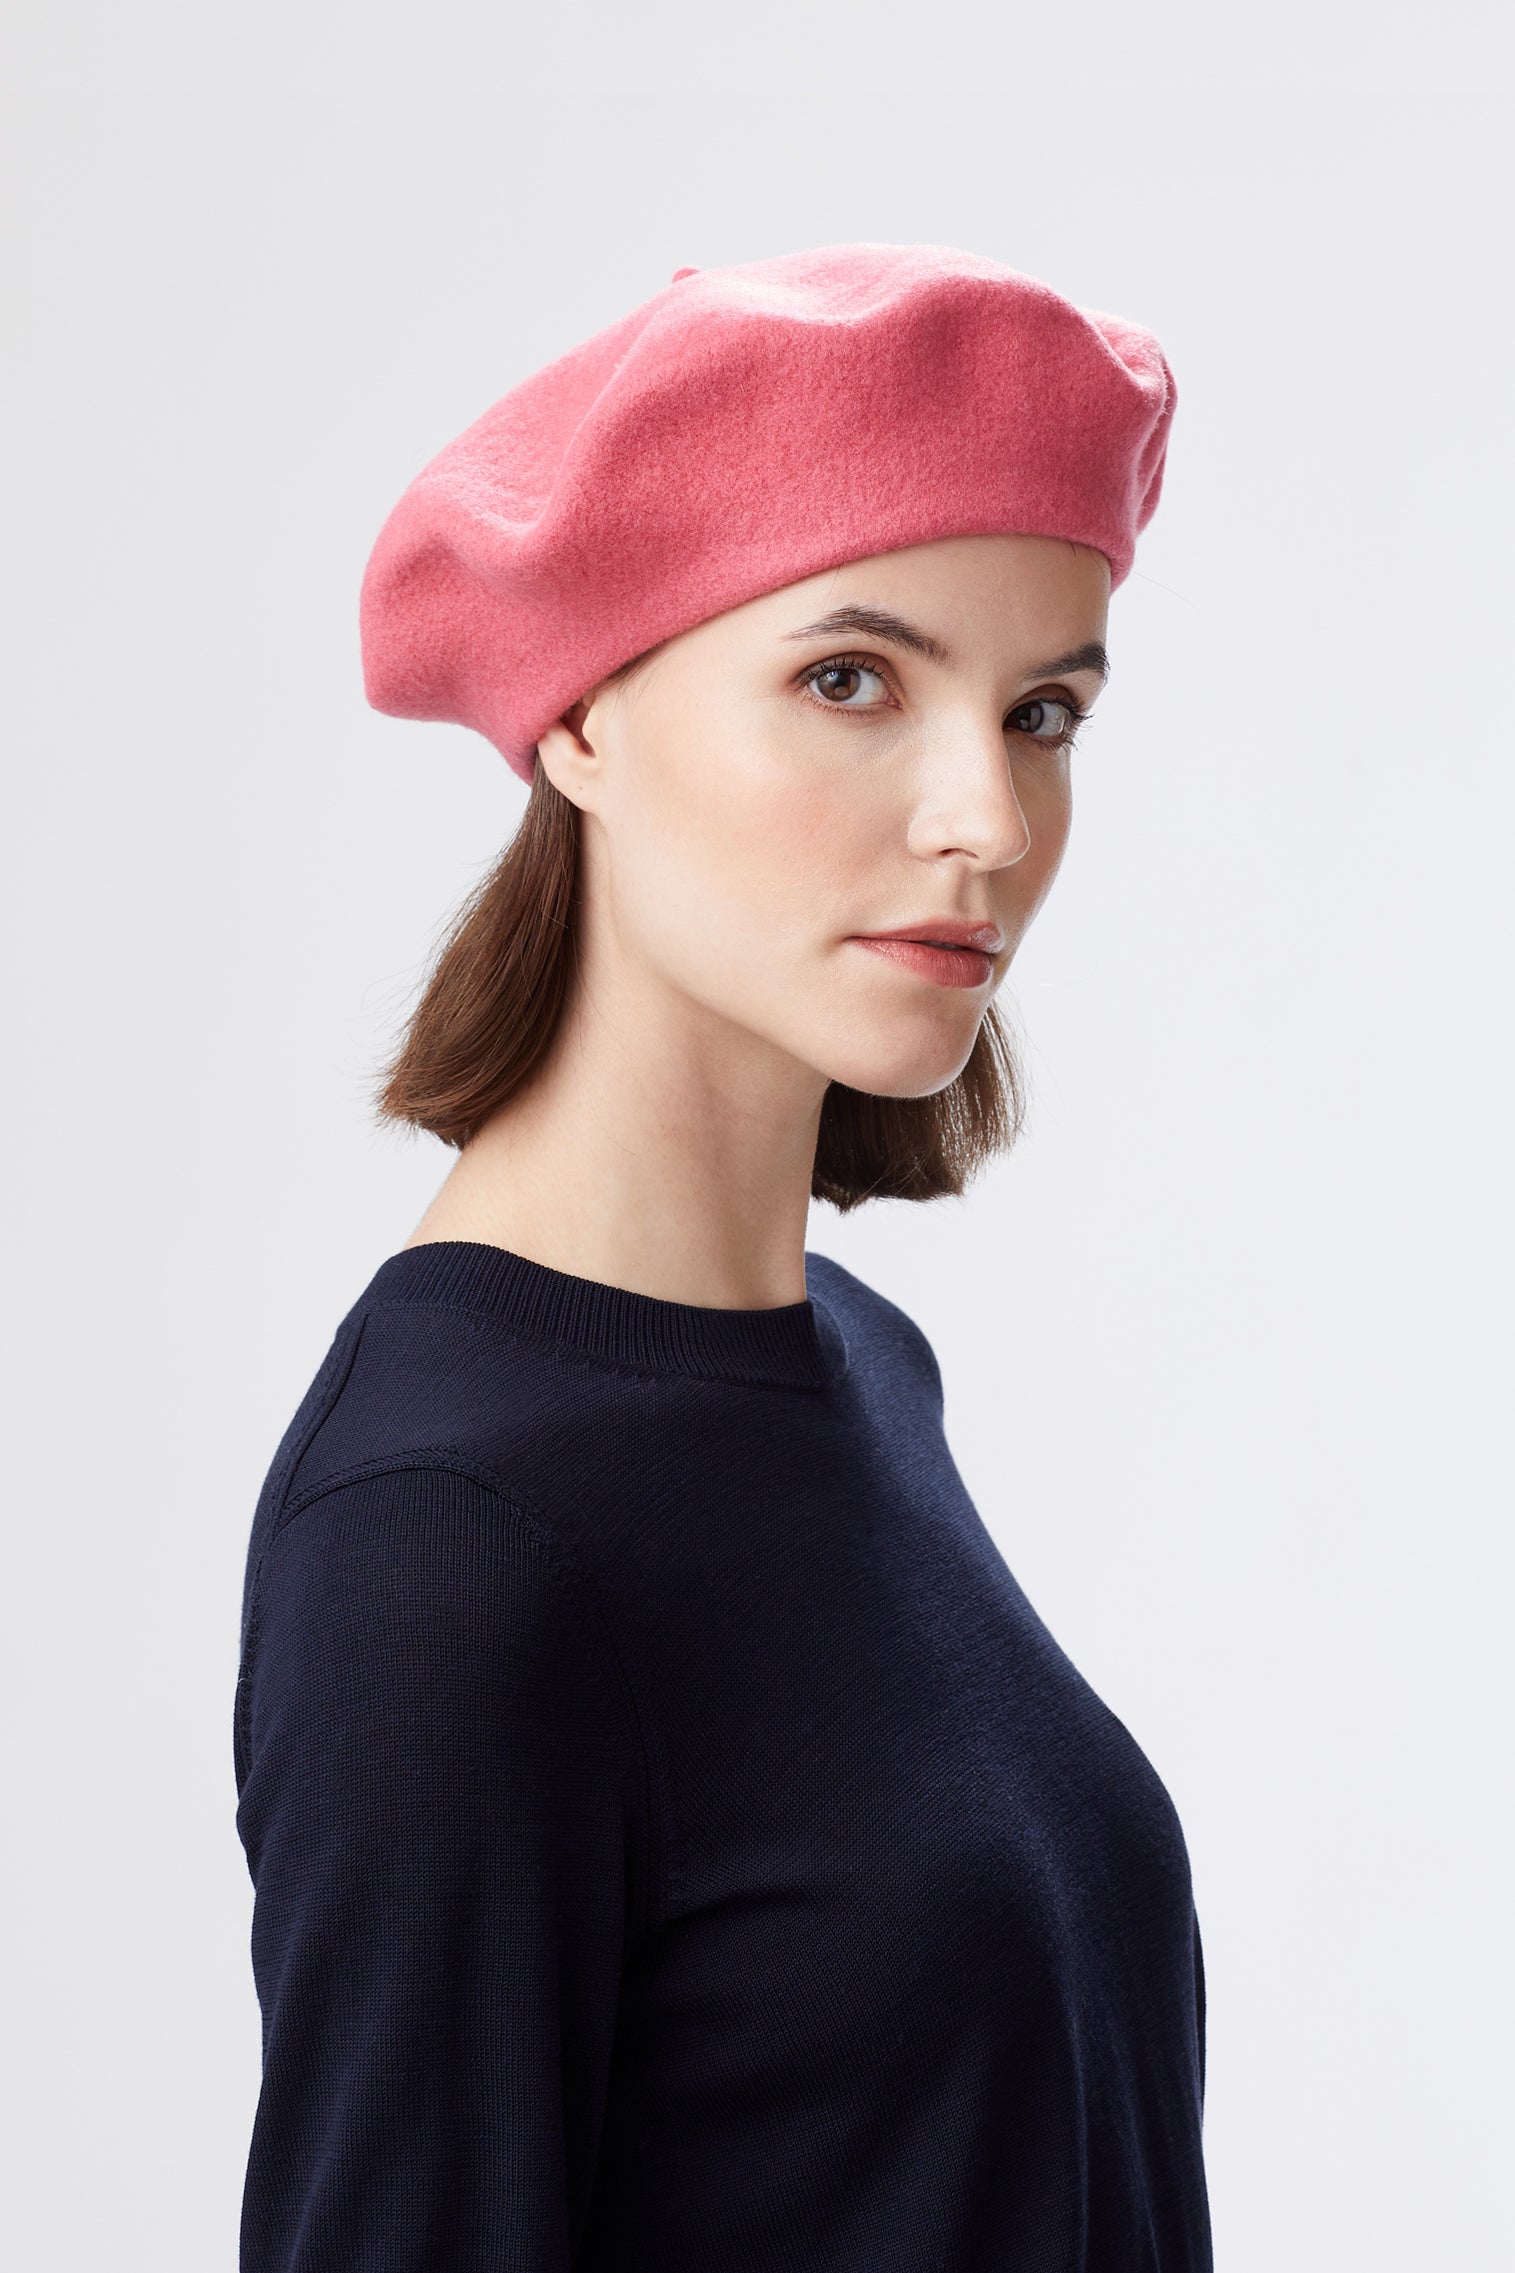 French Beret - Hats for Tall People - Lock & Co. Hatters London UK